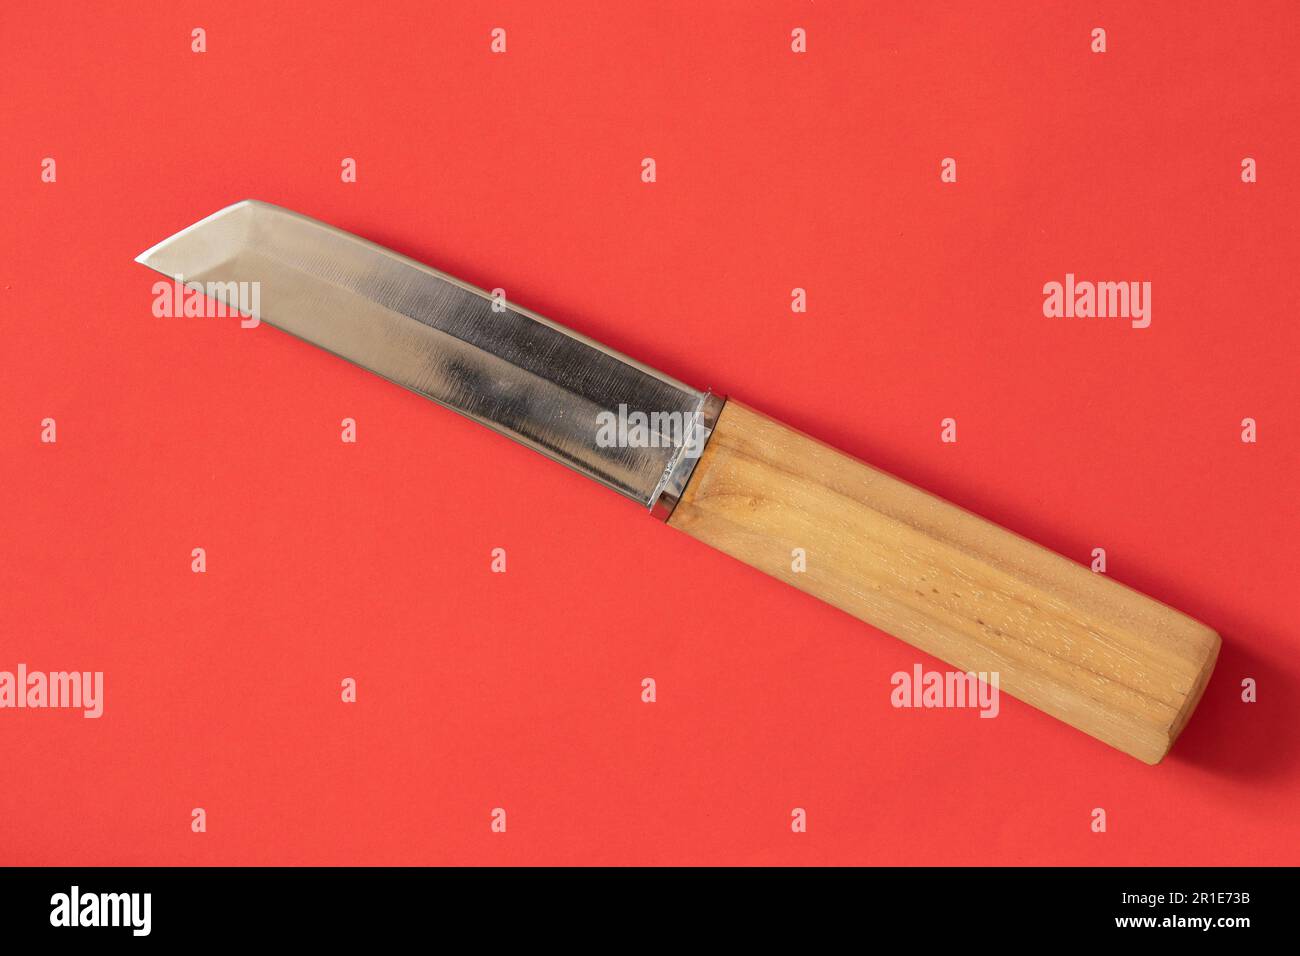 close up knife with a handle on an isolated background Stock Photo